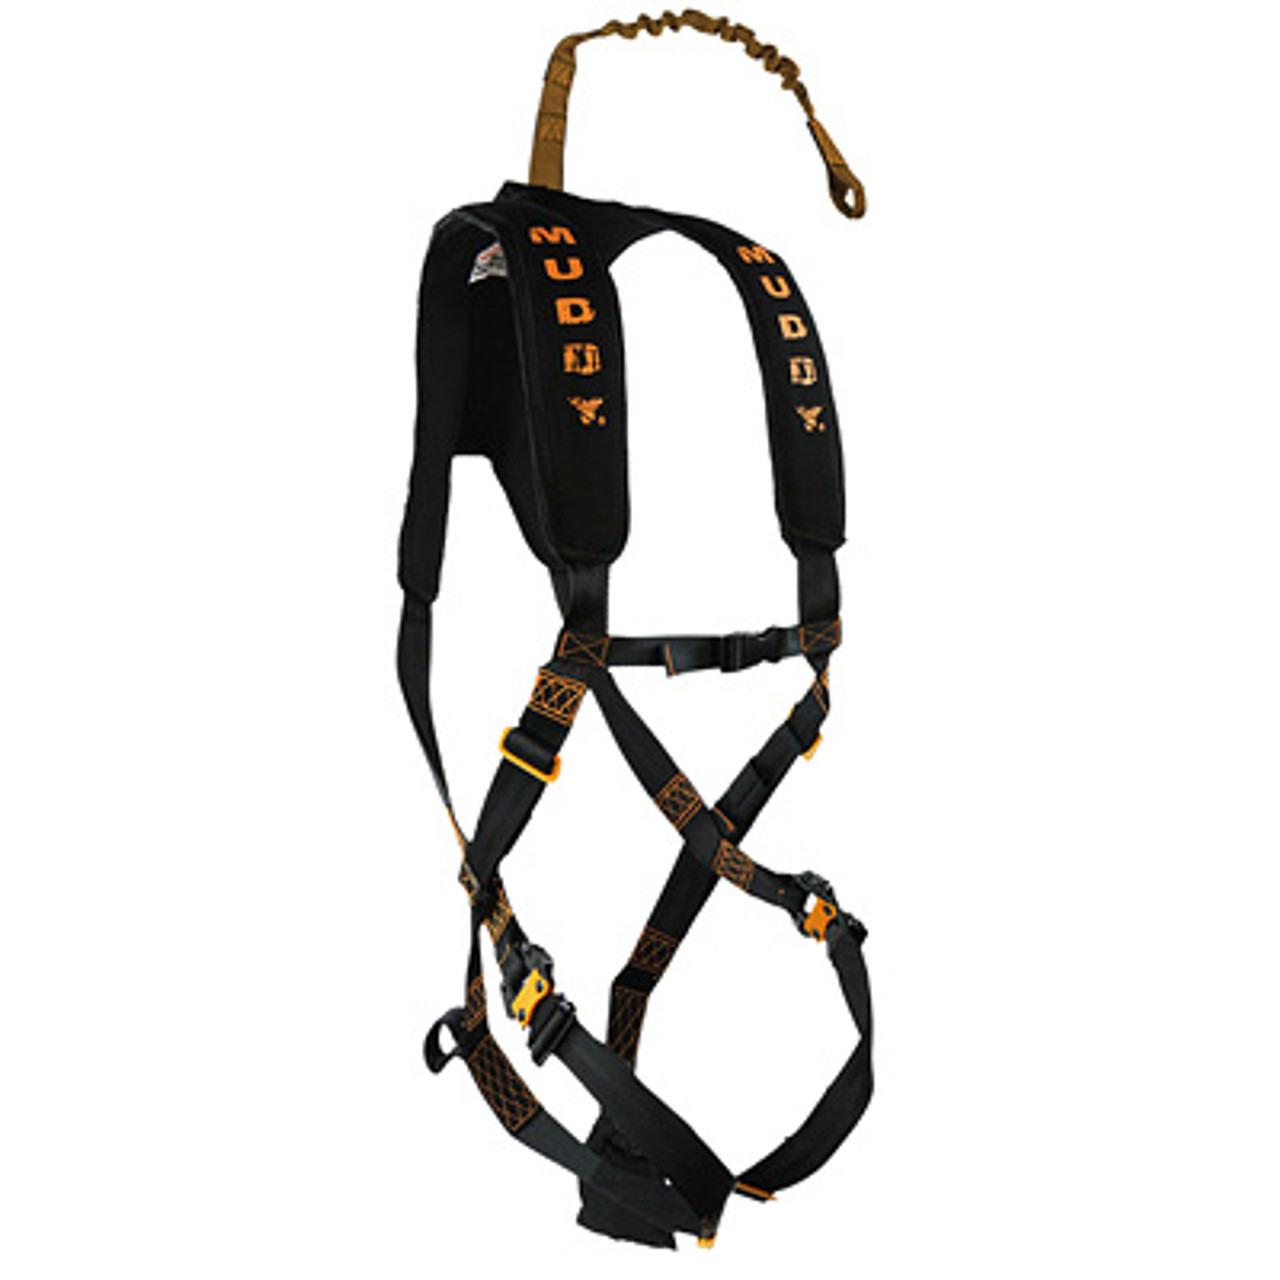 THE SAFETY HARNESS LINEMAN'S ROPE